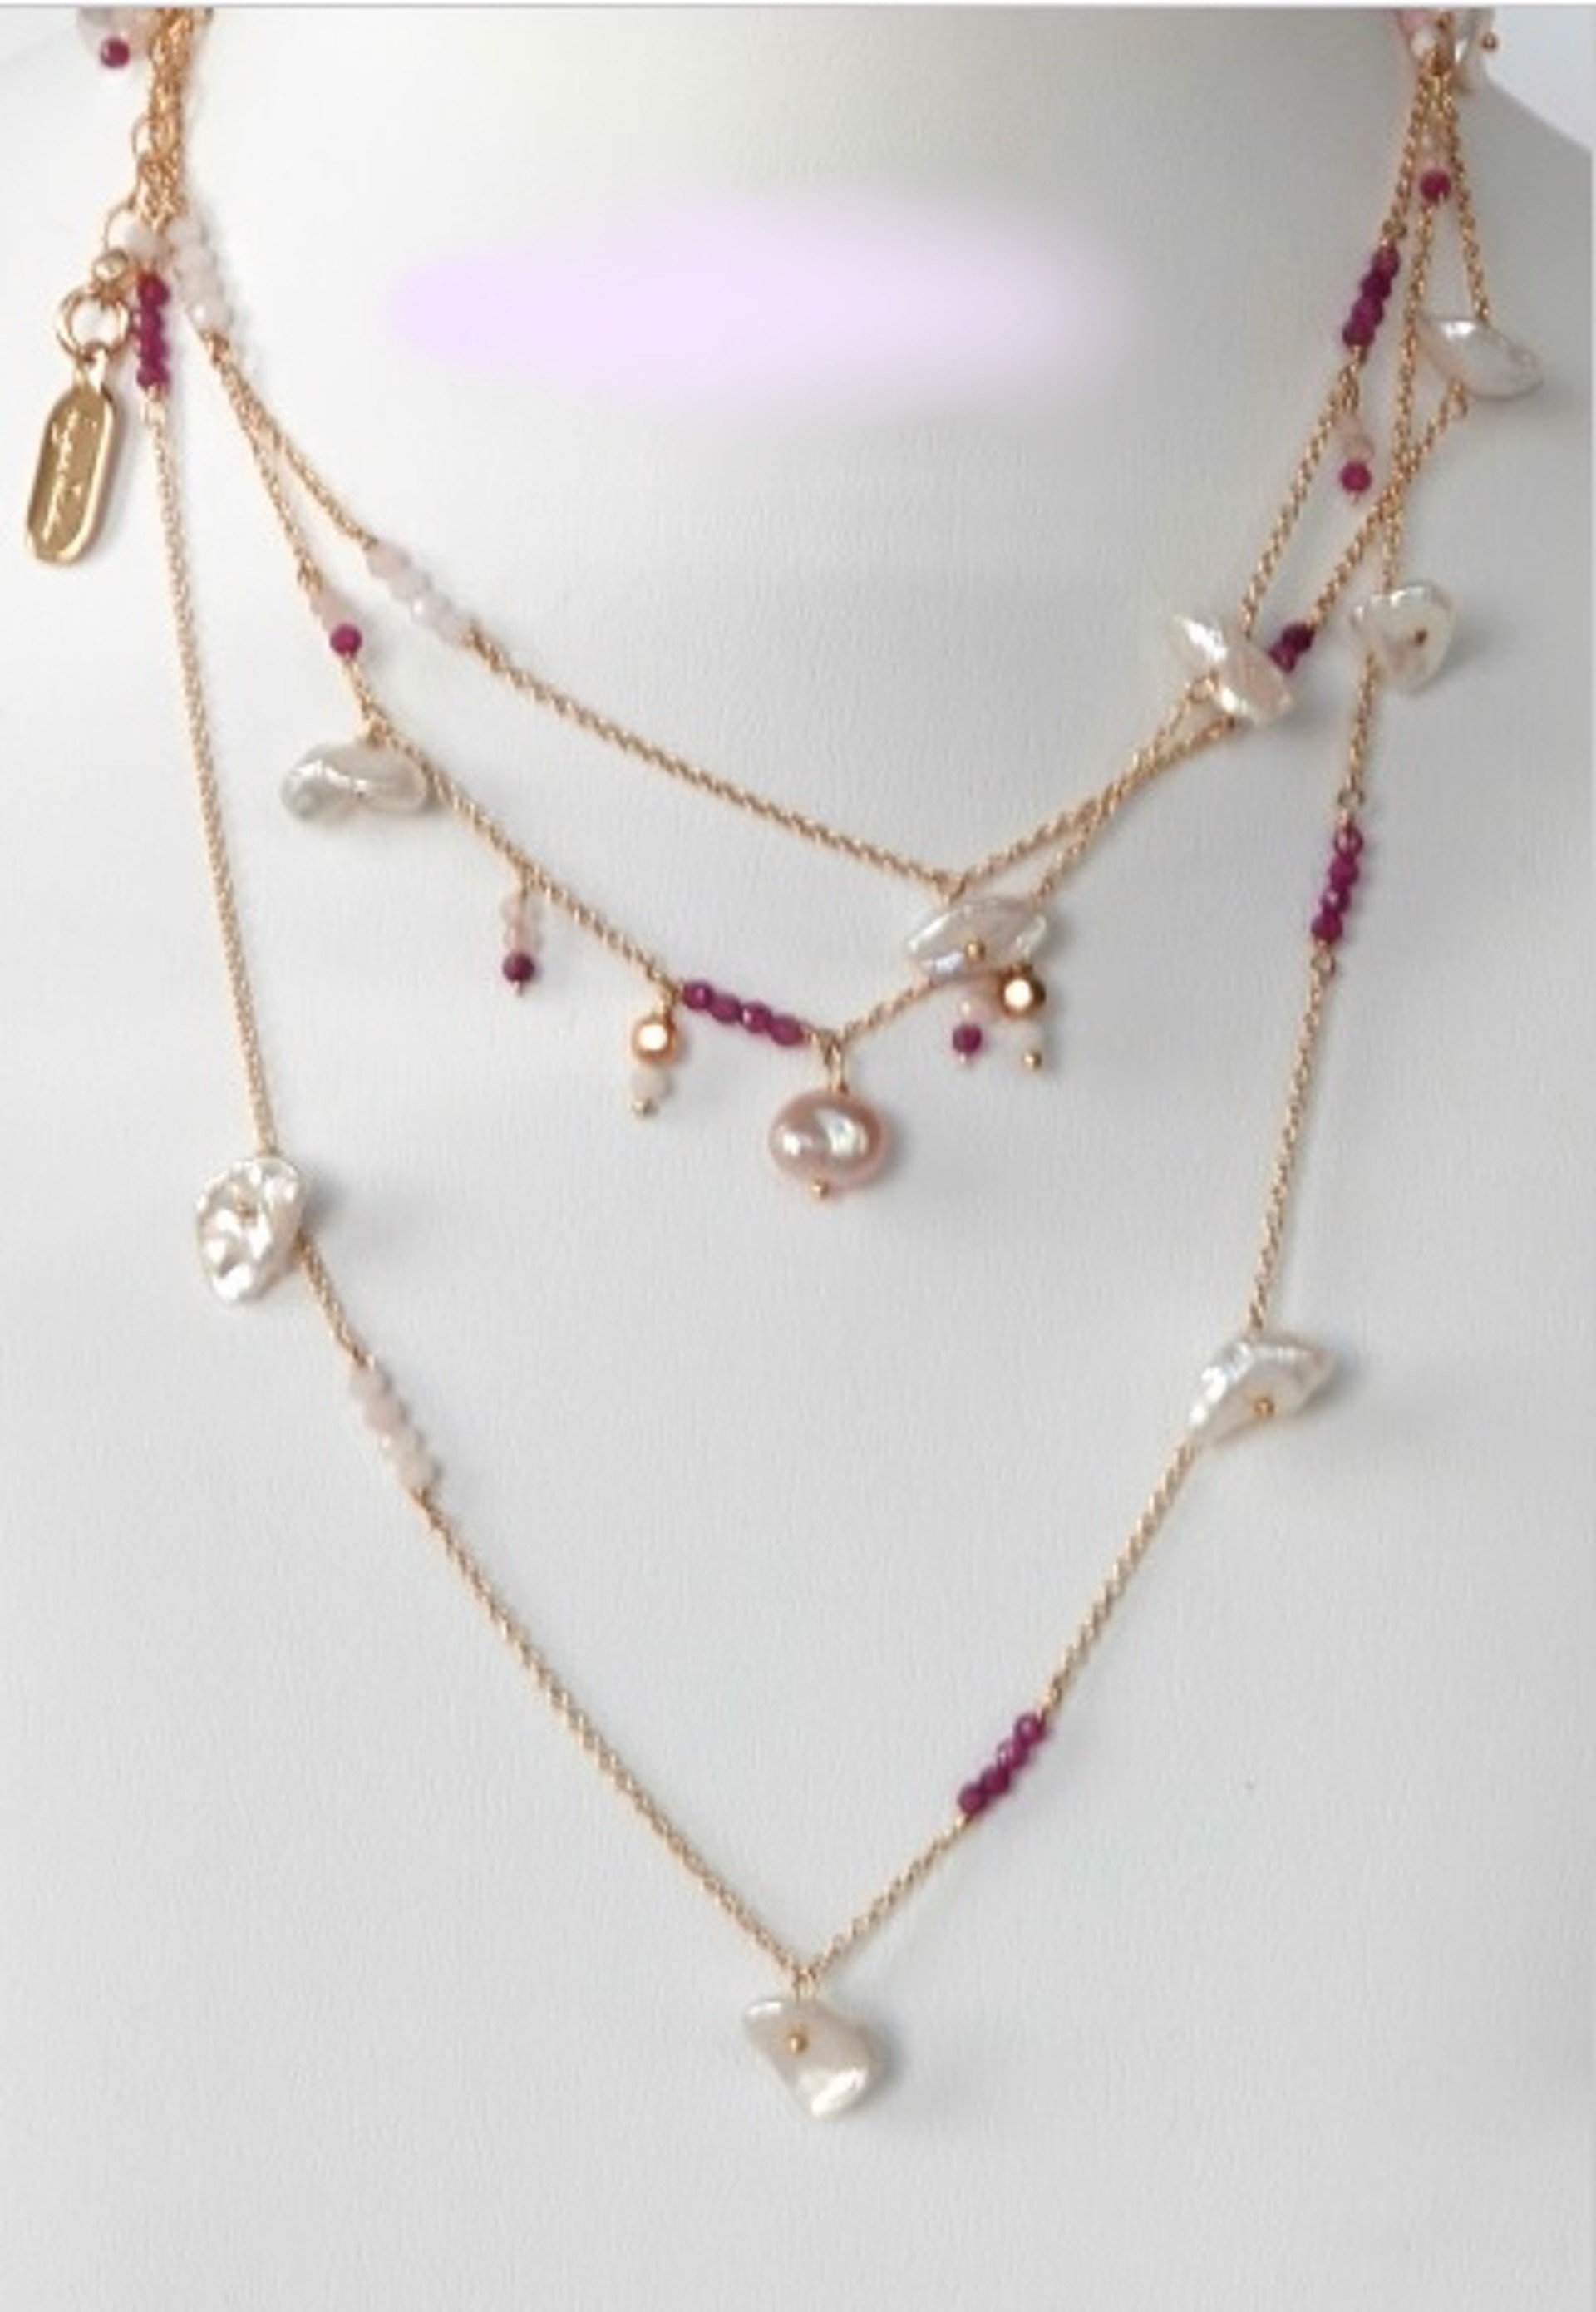 Freshwater Pearl, Ruby and Moonstone drops on long chain by Christine Renau